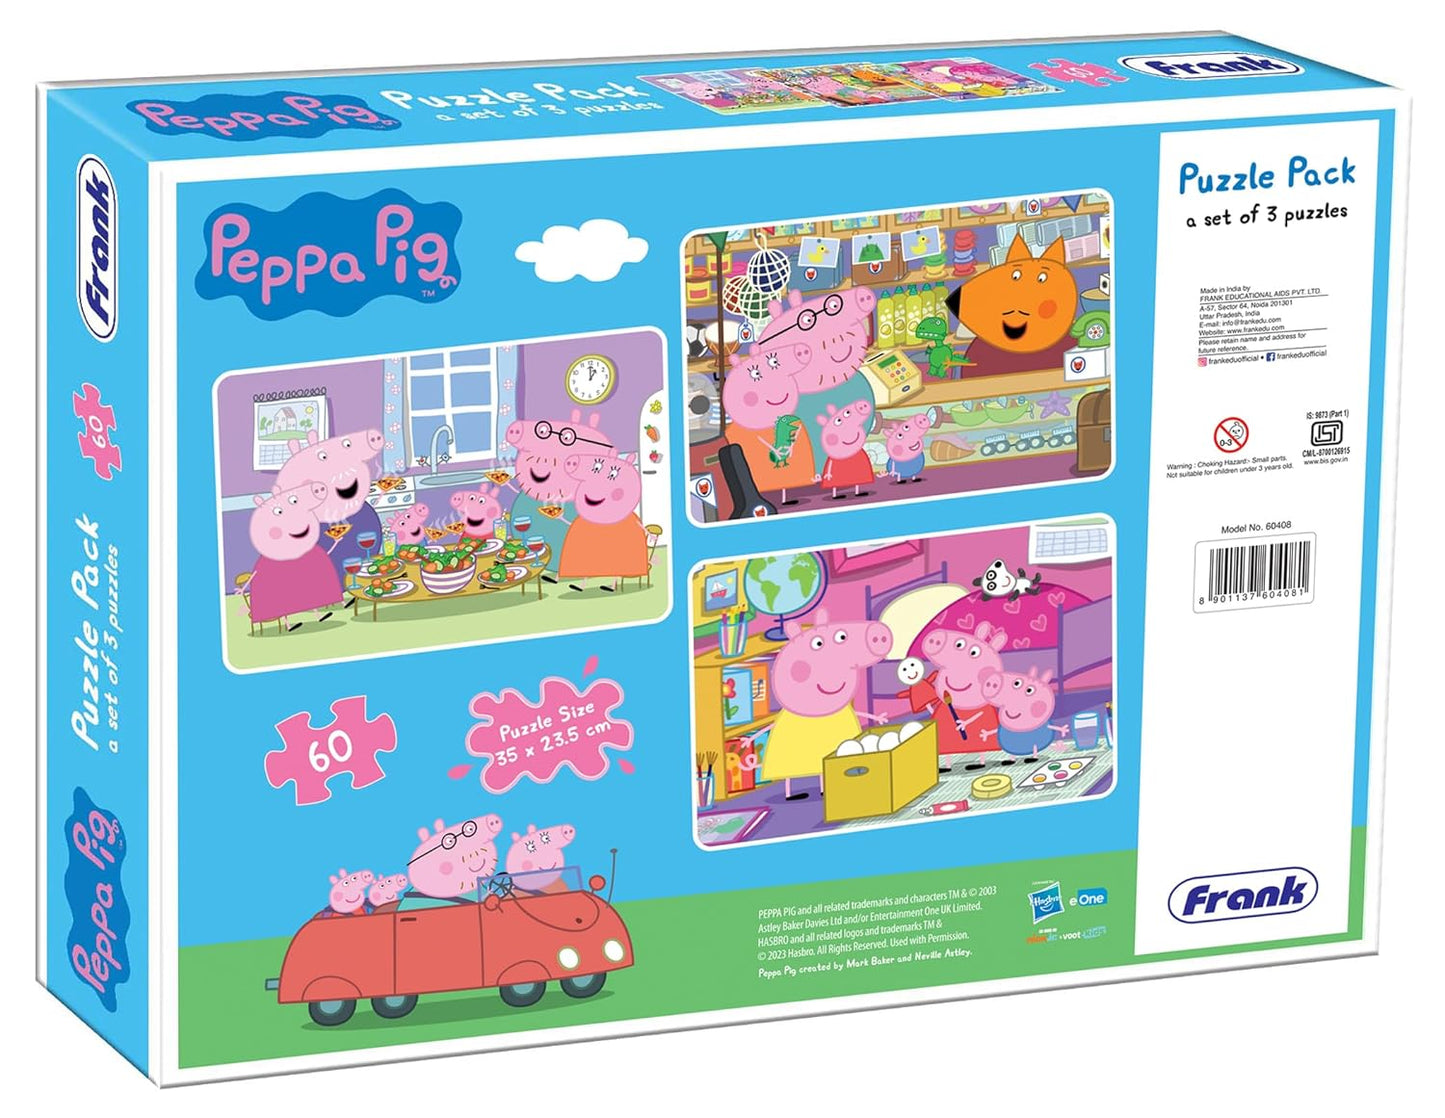 Frank Peppa Pig (60 Pieces) 3-in-1 Jigsaw Puzzle